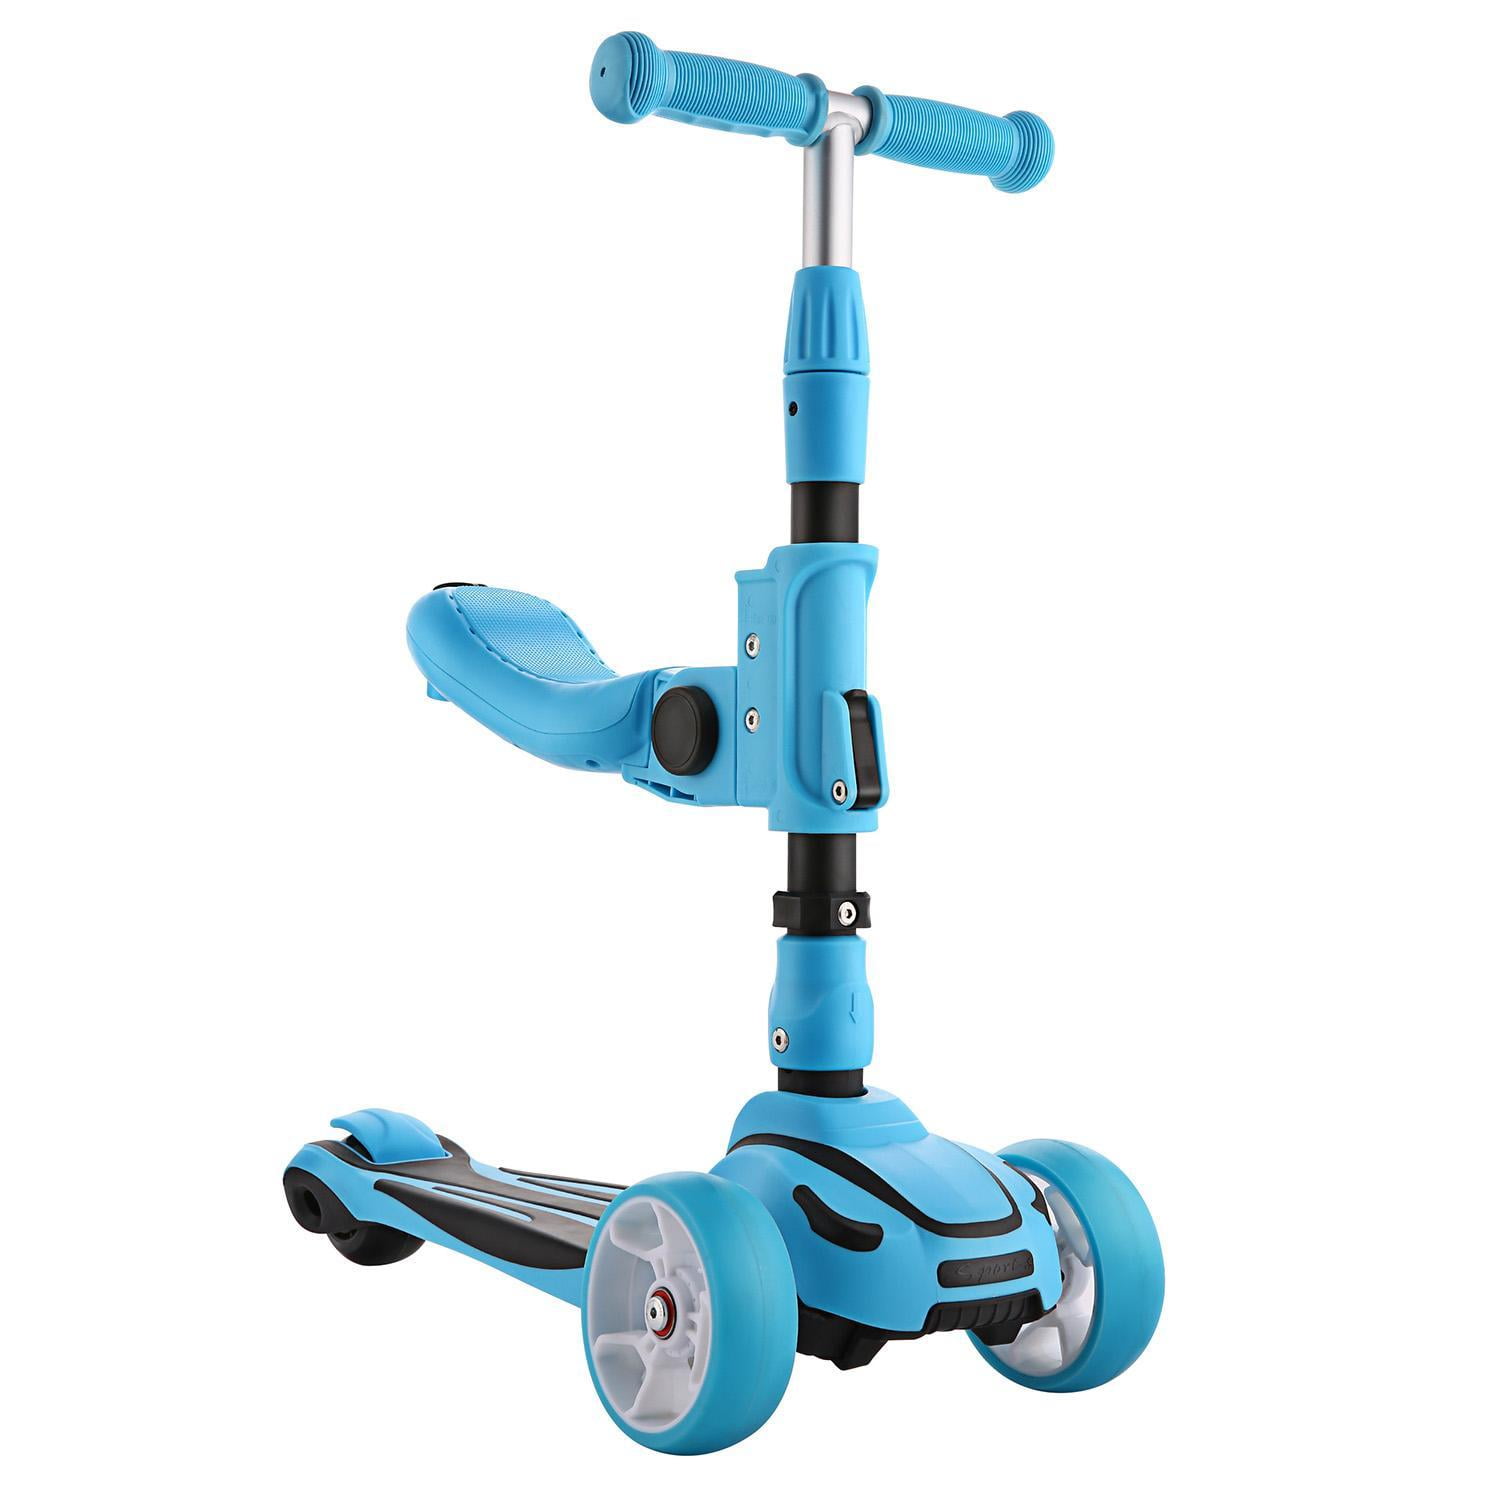 2 wheel scooter 6 year old